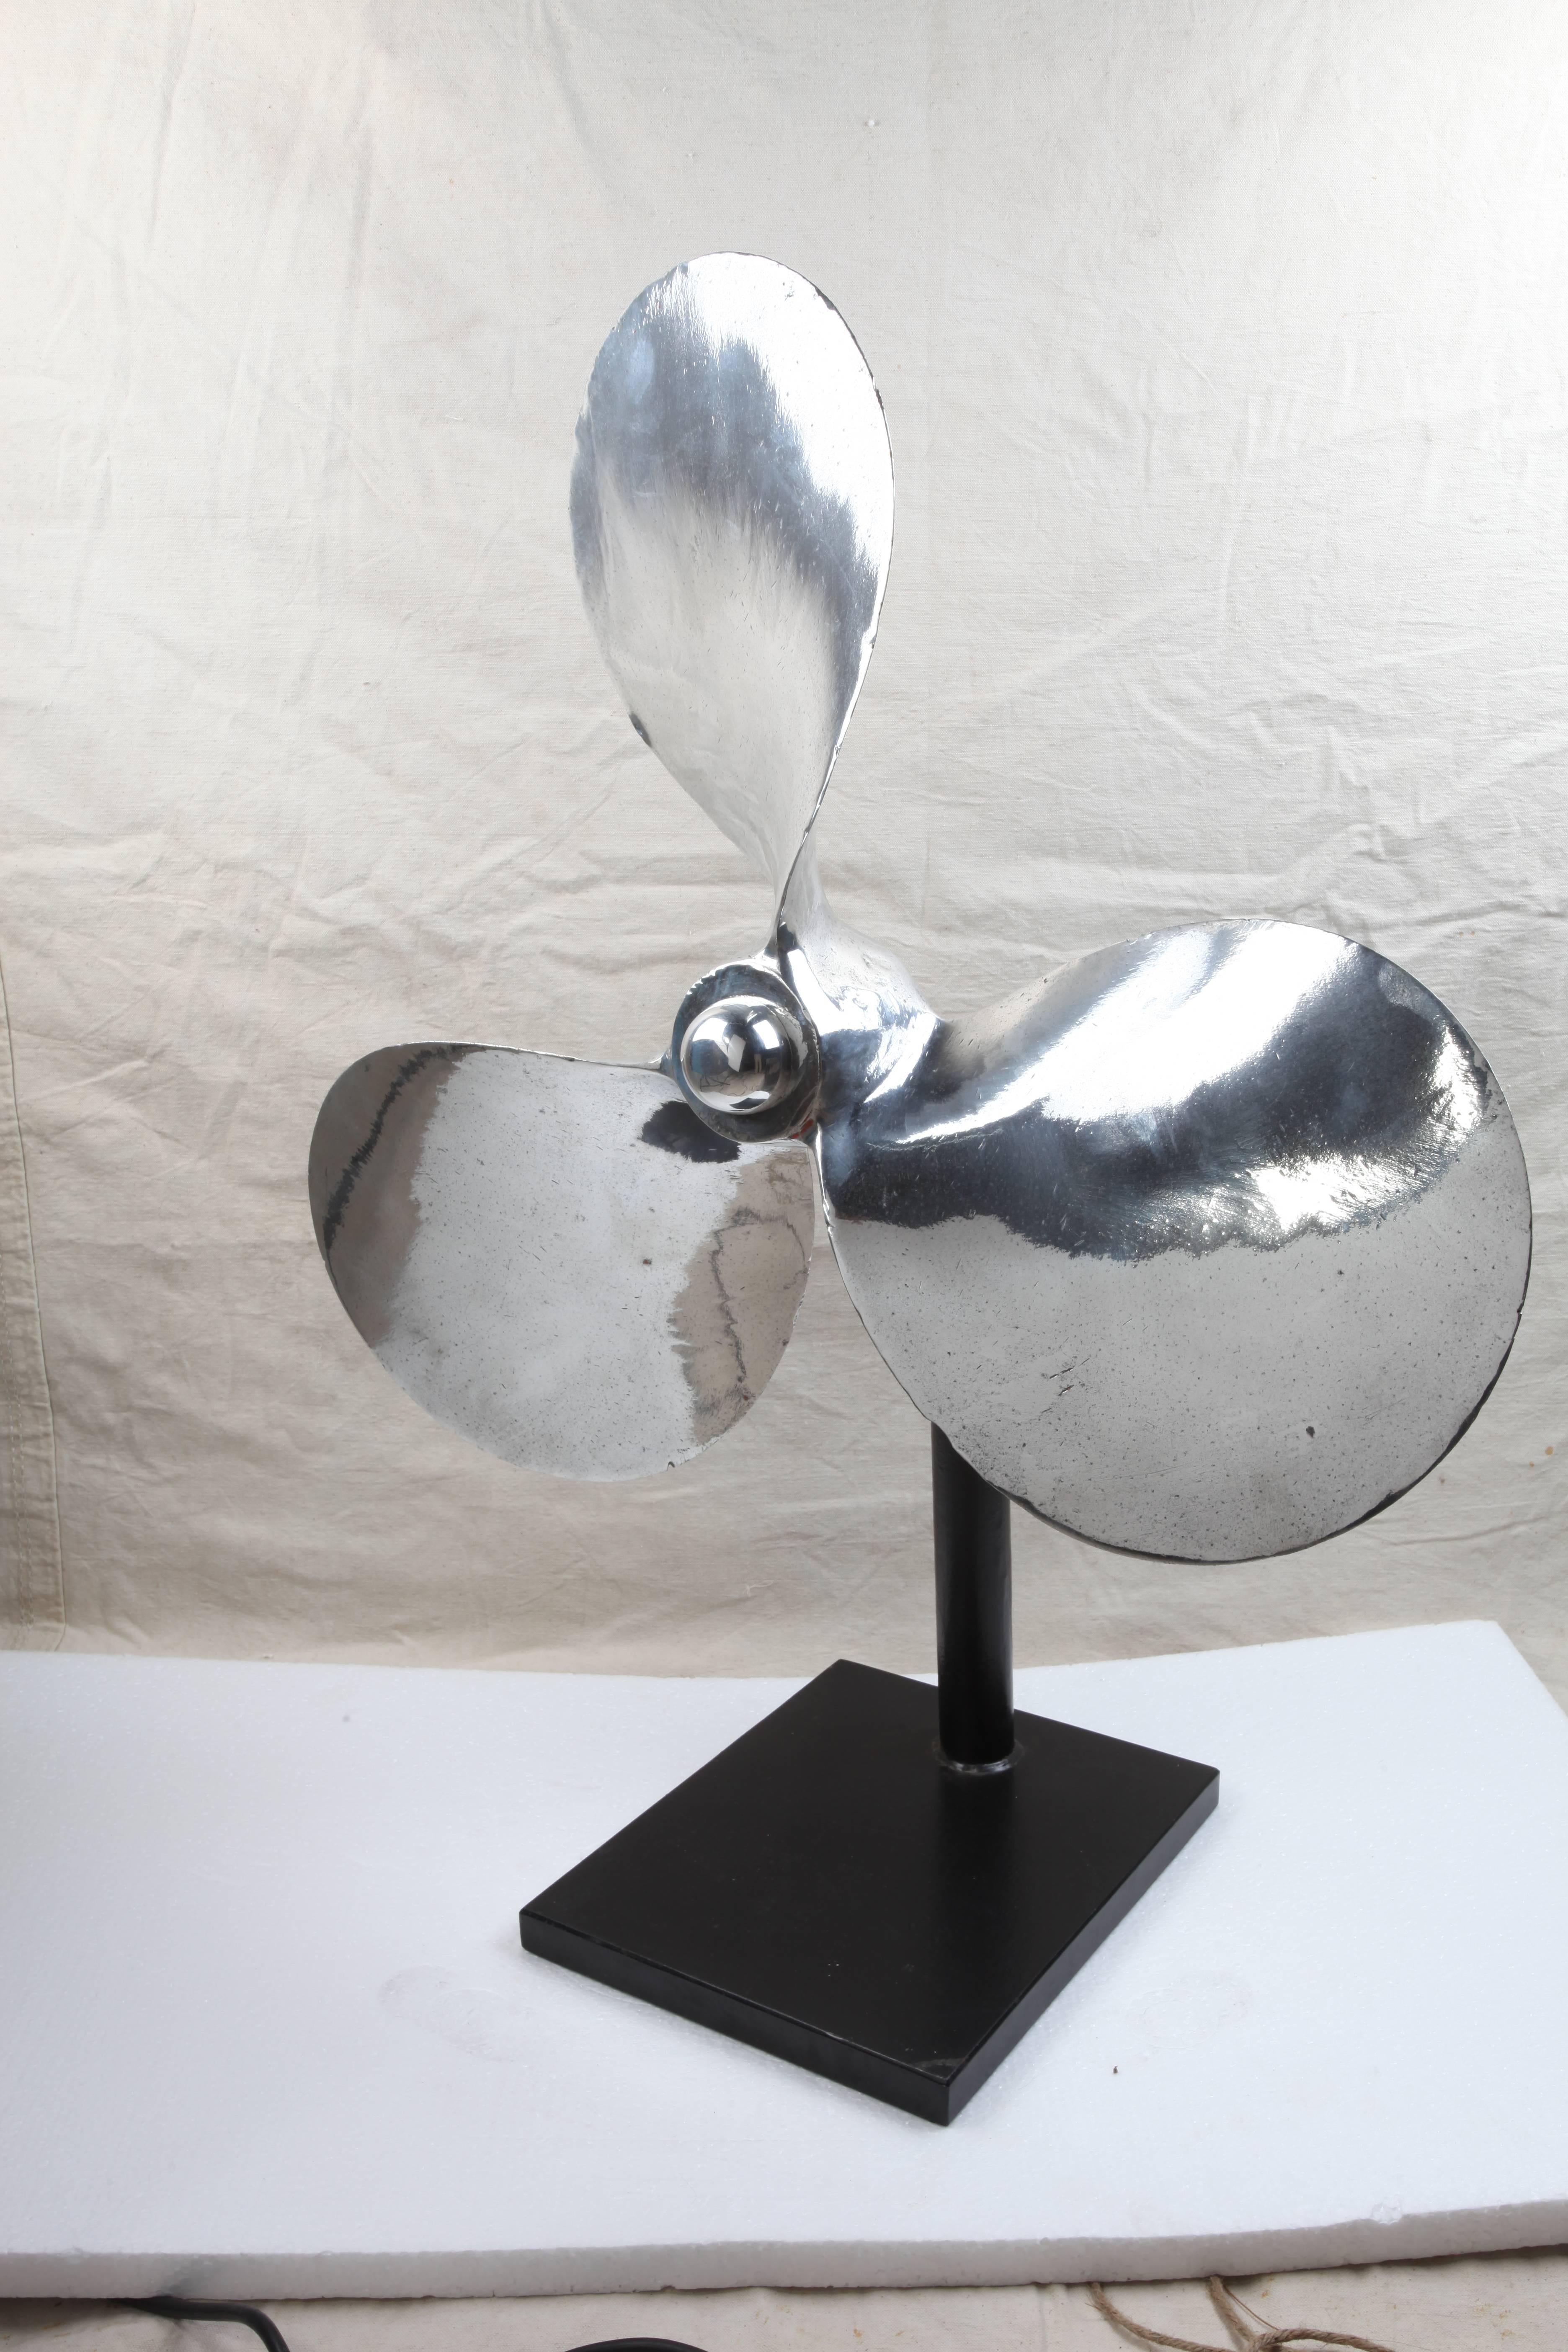 A very large chrome ship's propeller from a large lifeboat, circa 1970s. It sits on a custom made stand made of iron. Can be taken on and off. The rounded nut holding the prop onto the stand is chrome. Makes a great sculpture, inside or out.